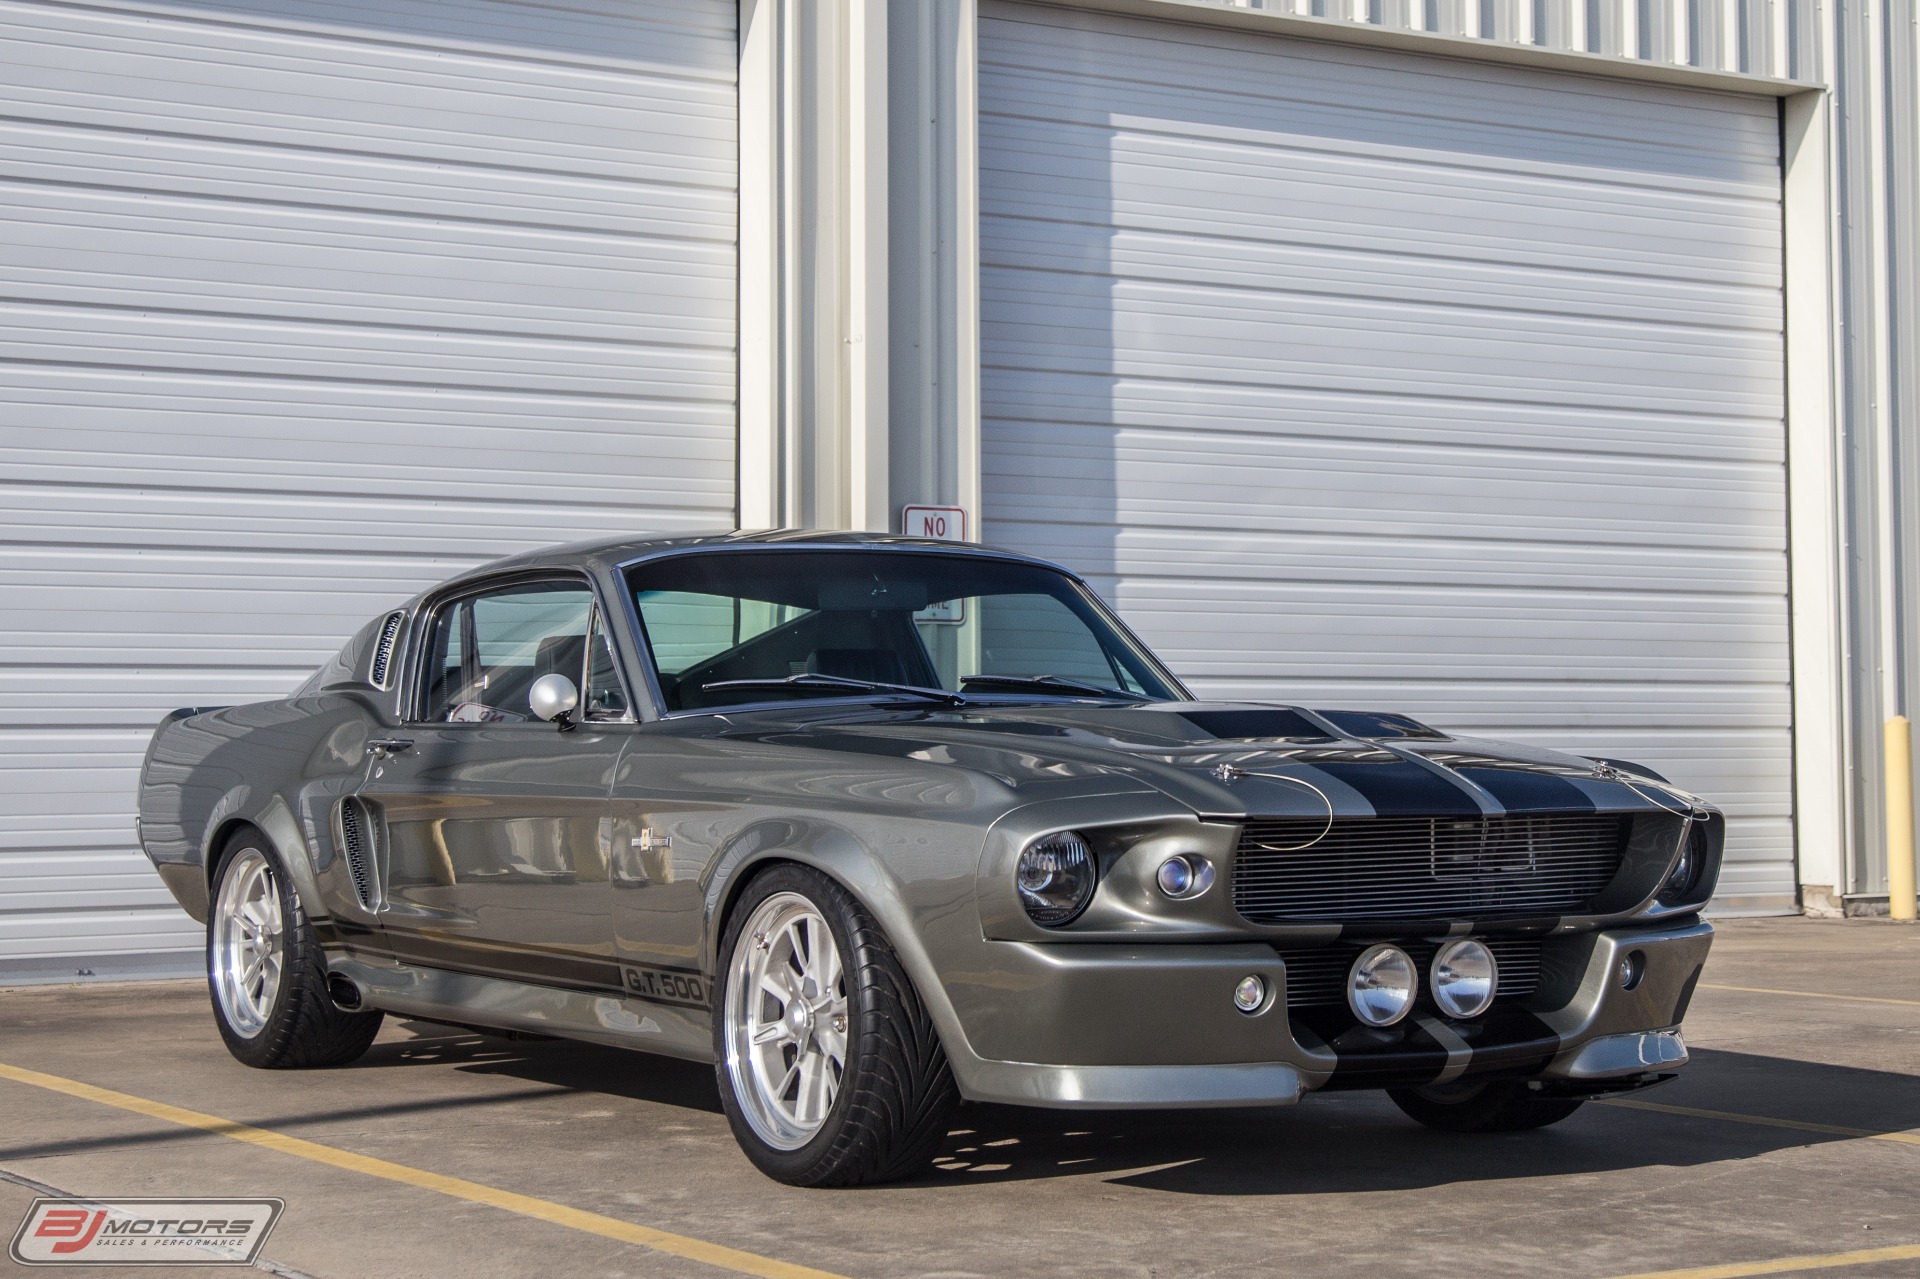 Used 1967 Ford Mustang GT500 Eleanor Clone For Sale ...
 1967 Ford Mustang Eleanor